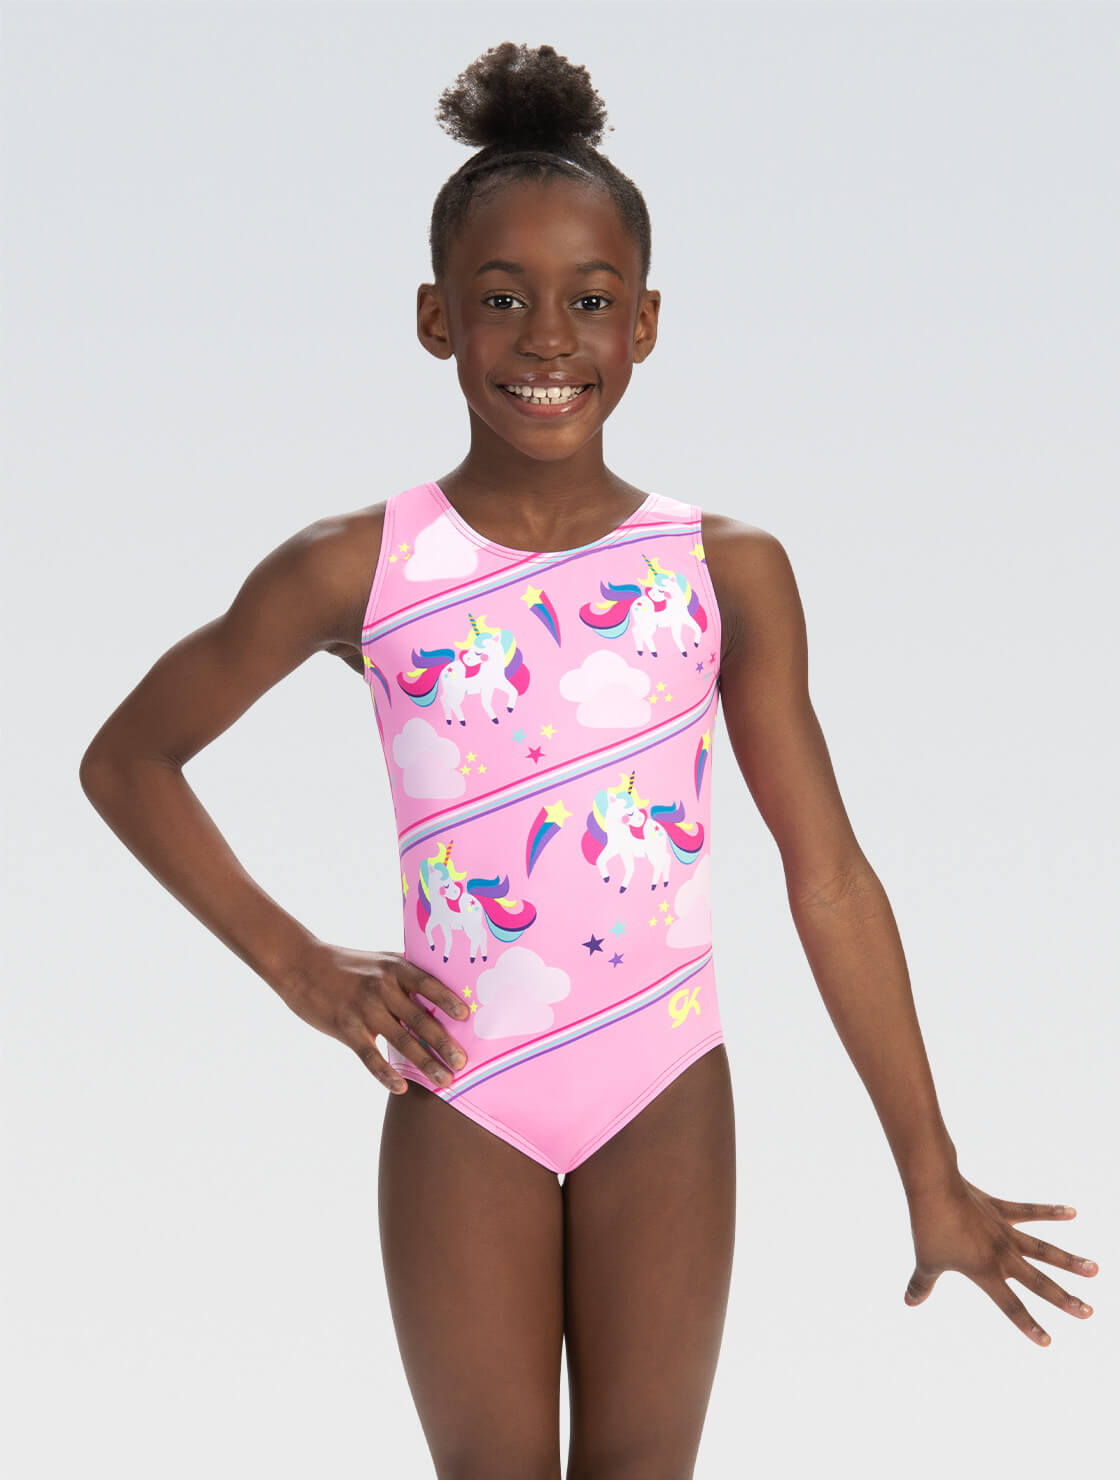 Lila’s™ Gymnastics Competition Leotard for Girls | American Girl®